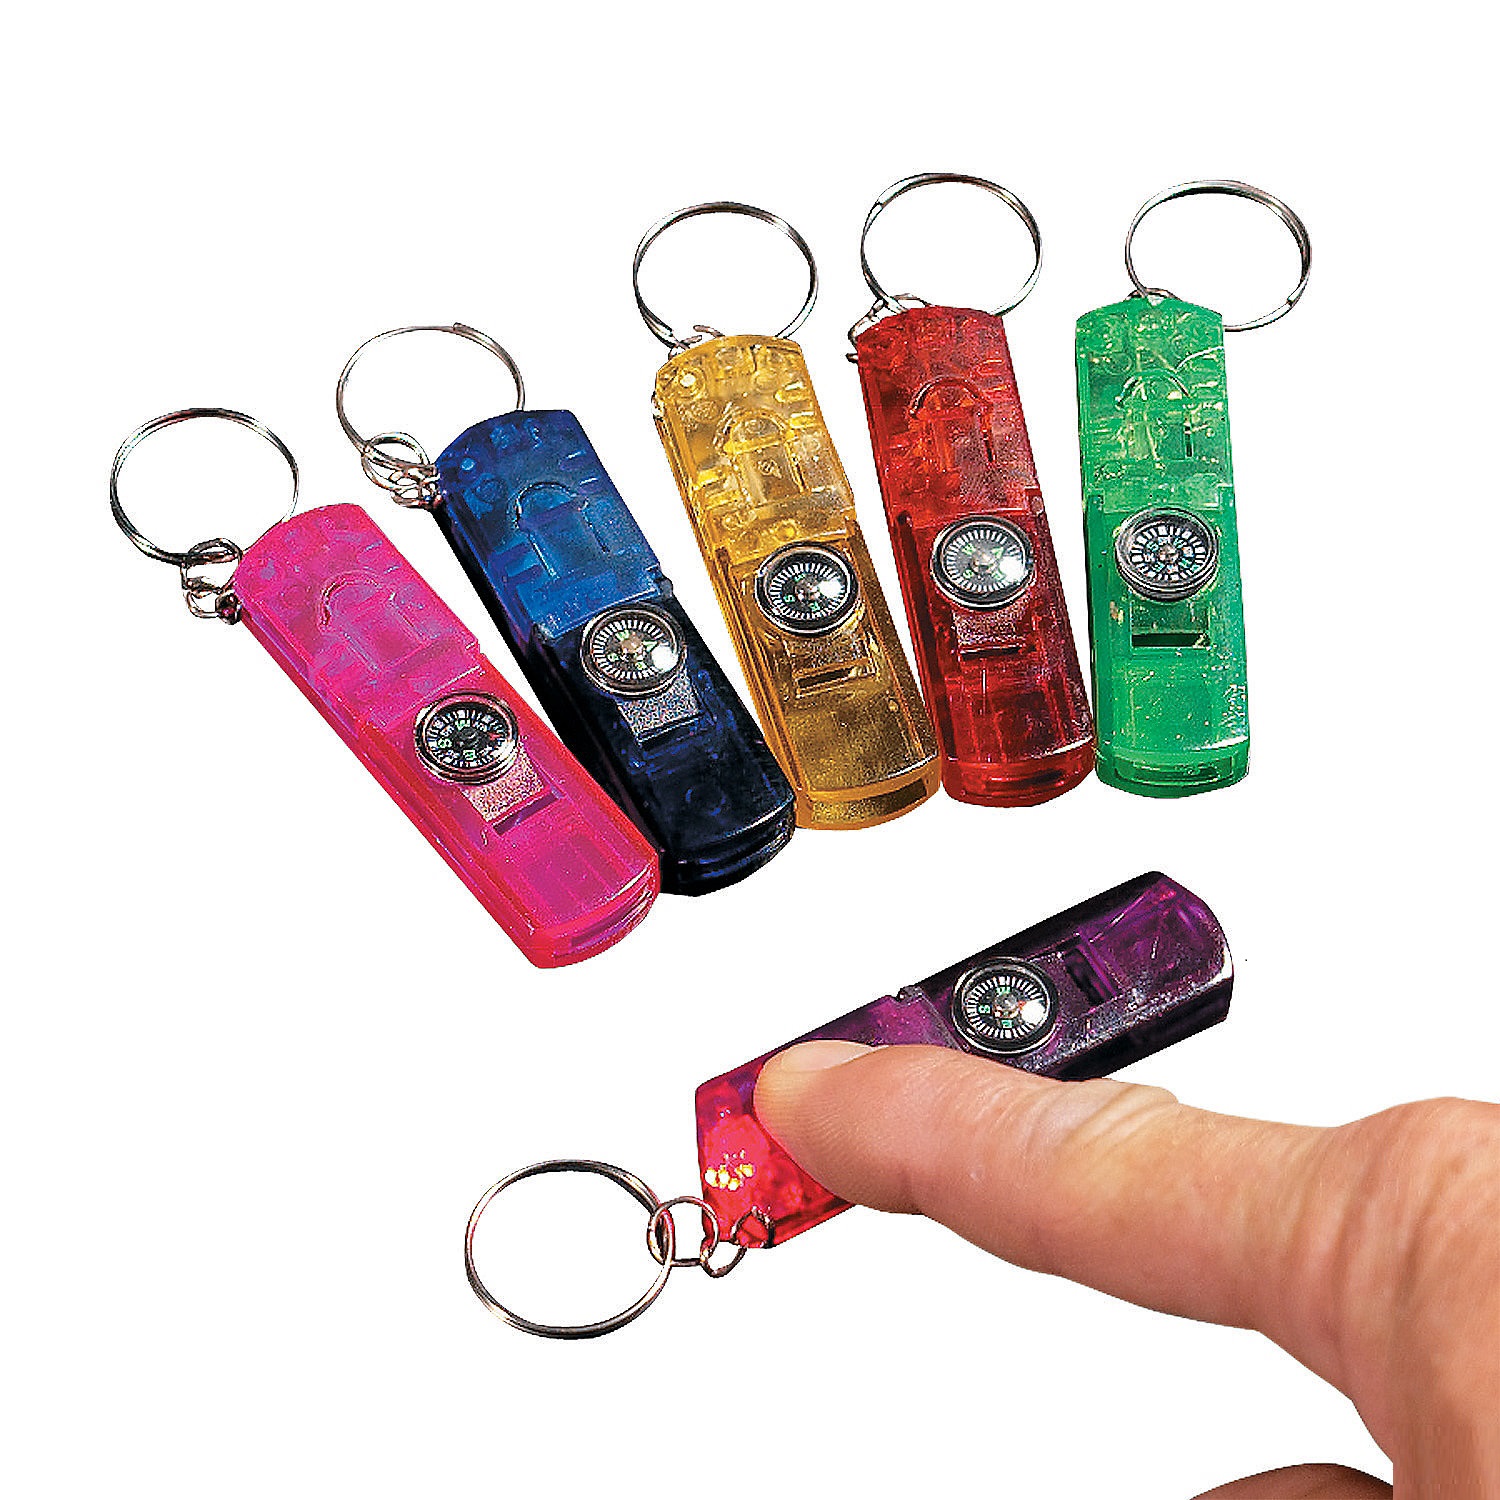 3-in-1-whistle-toy-compass-and-light-up-keychains-12-pc-_19_531